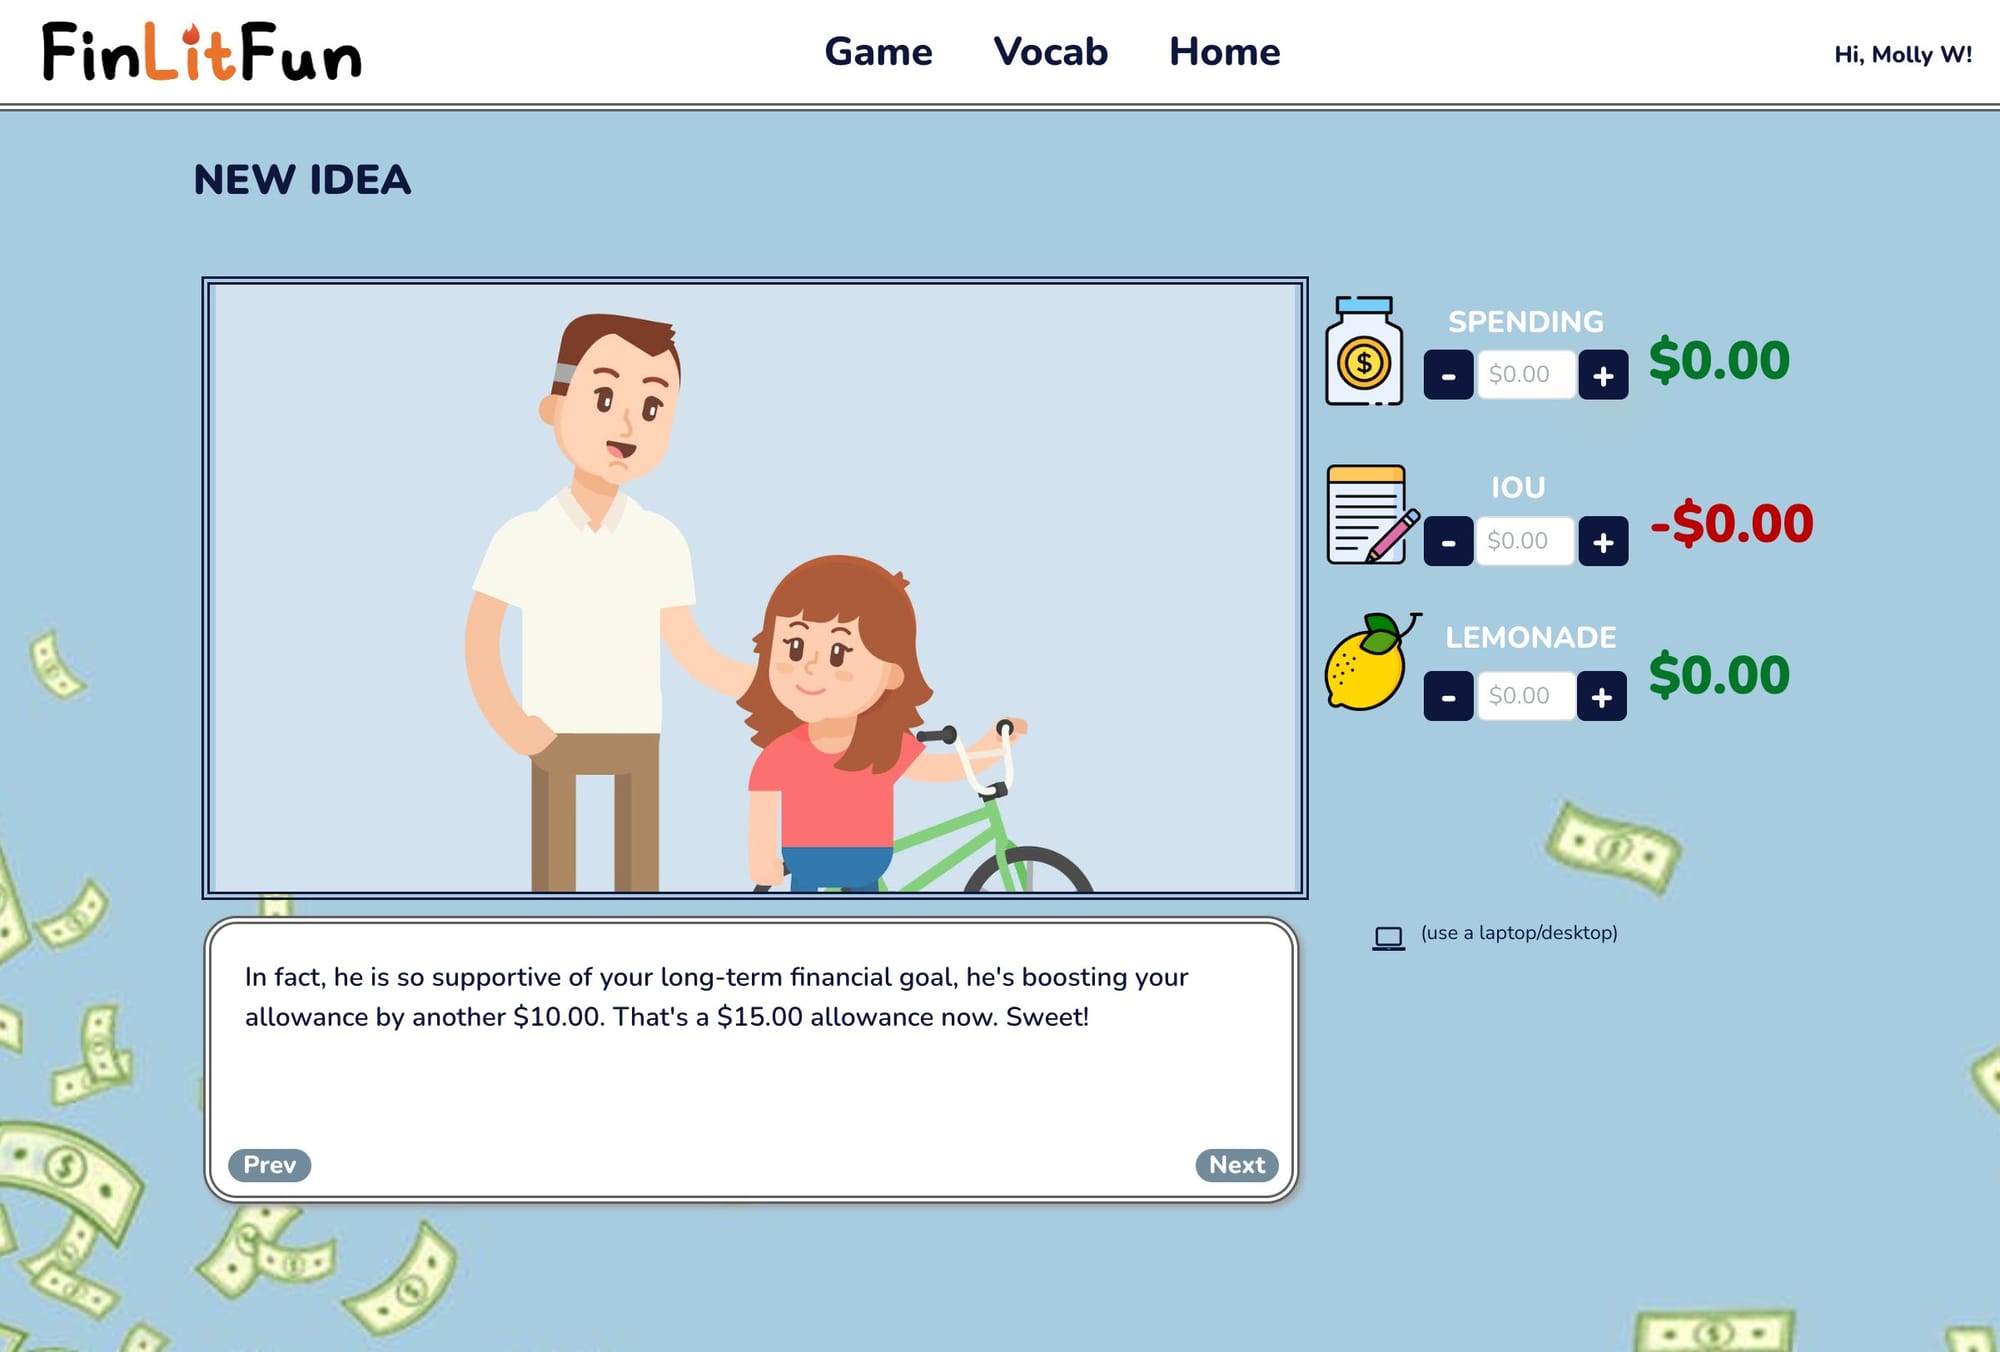 Game screen. Caption reads "In fact, he [Dad] is so supportive of your long-term financial goal, he's boosting your allowance by another $10.00. That's a $15.00 allowance now. Sweet!"